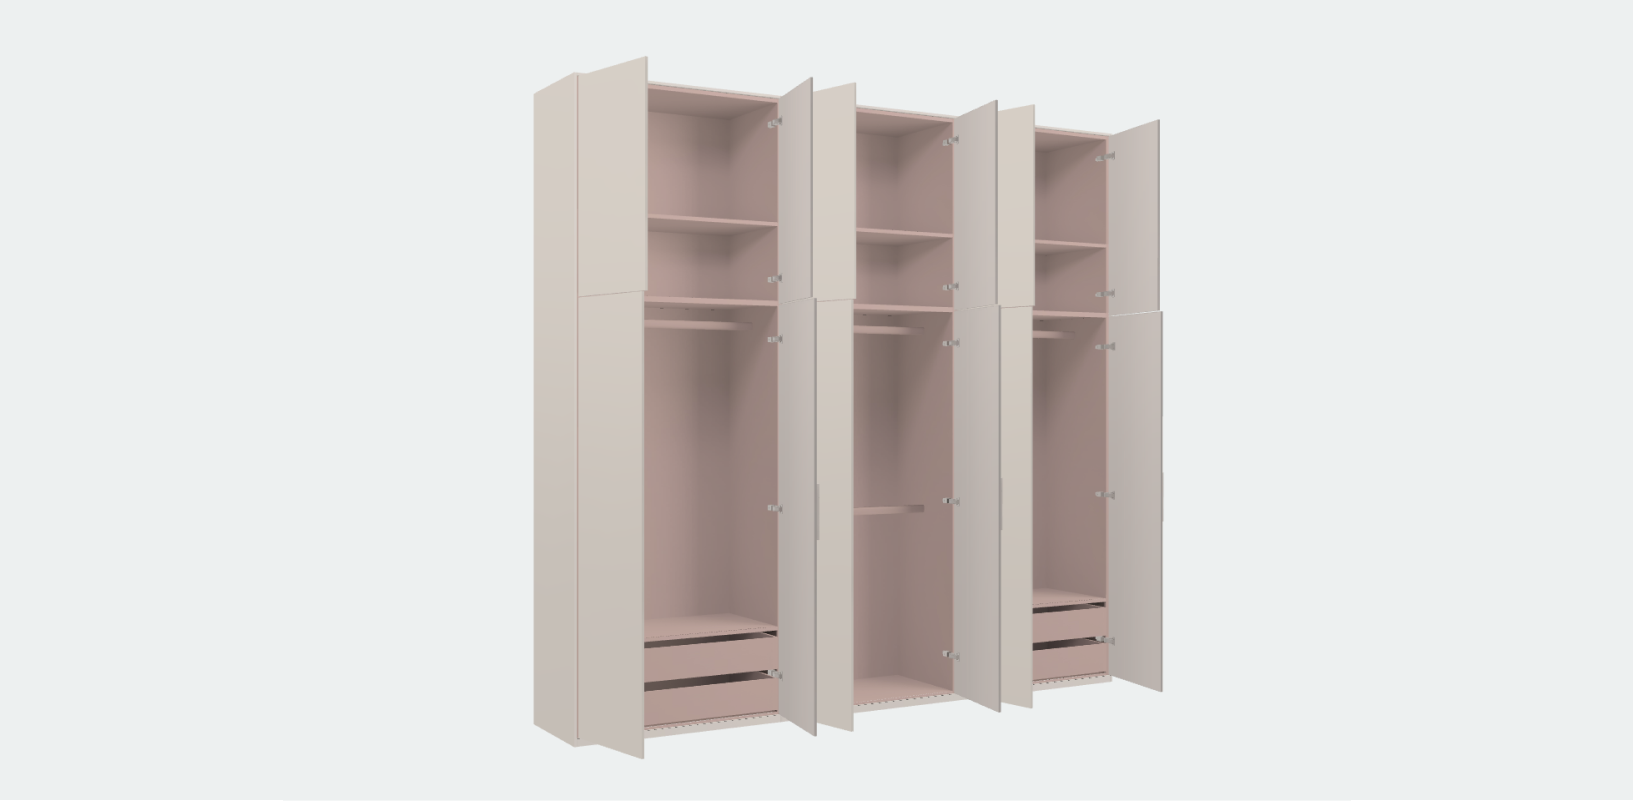 Wardrobe in Beige and Pink with internal drawers